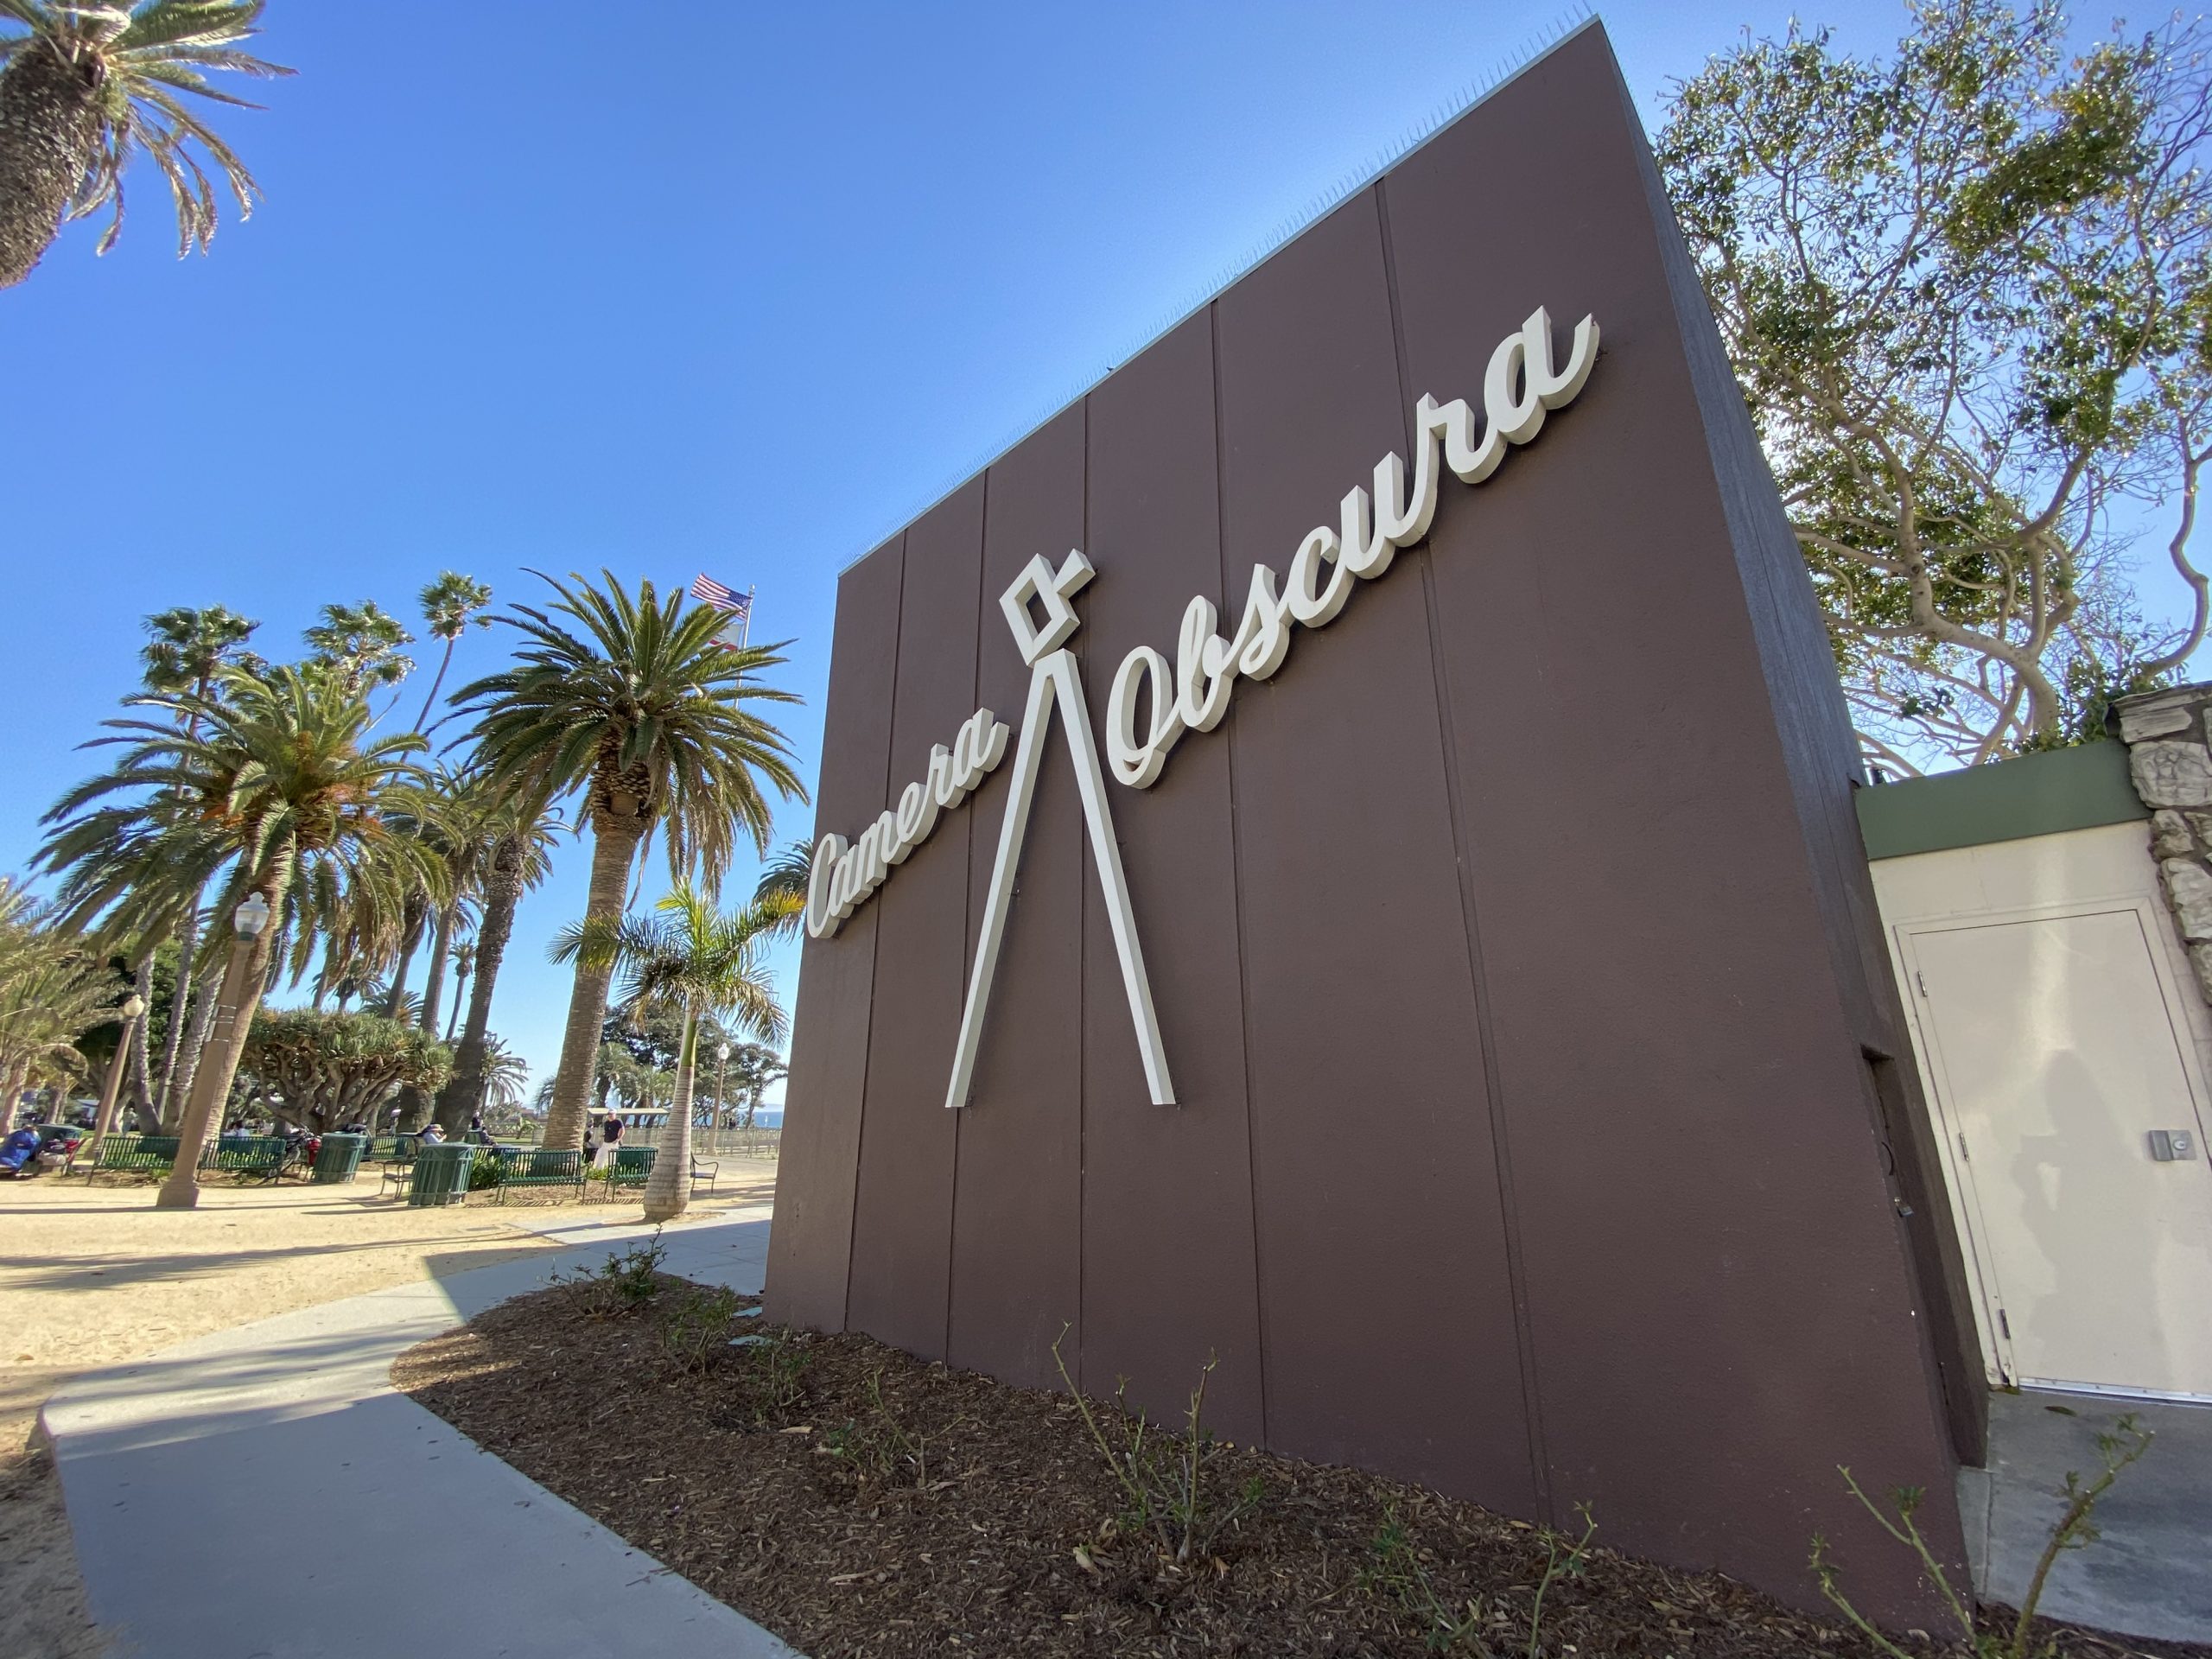 Arguably, the Coolest Thing in L.A.: the Camera Obscura in Santa Monica